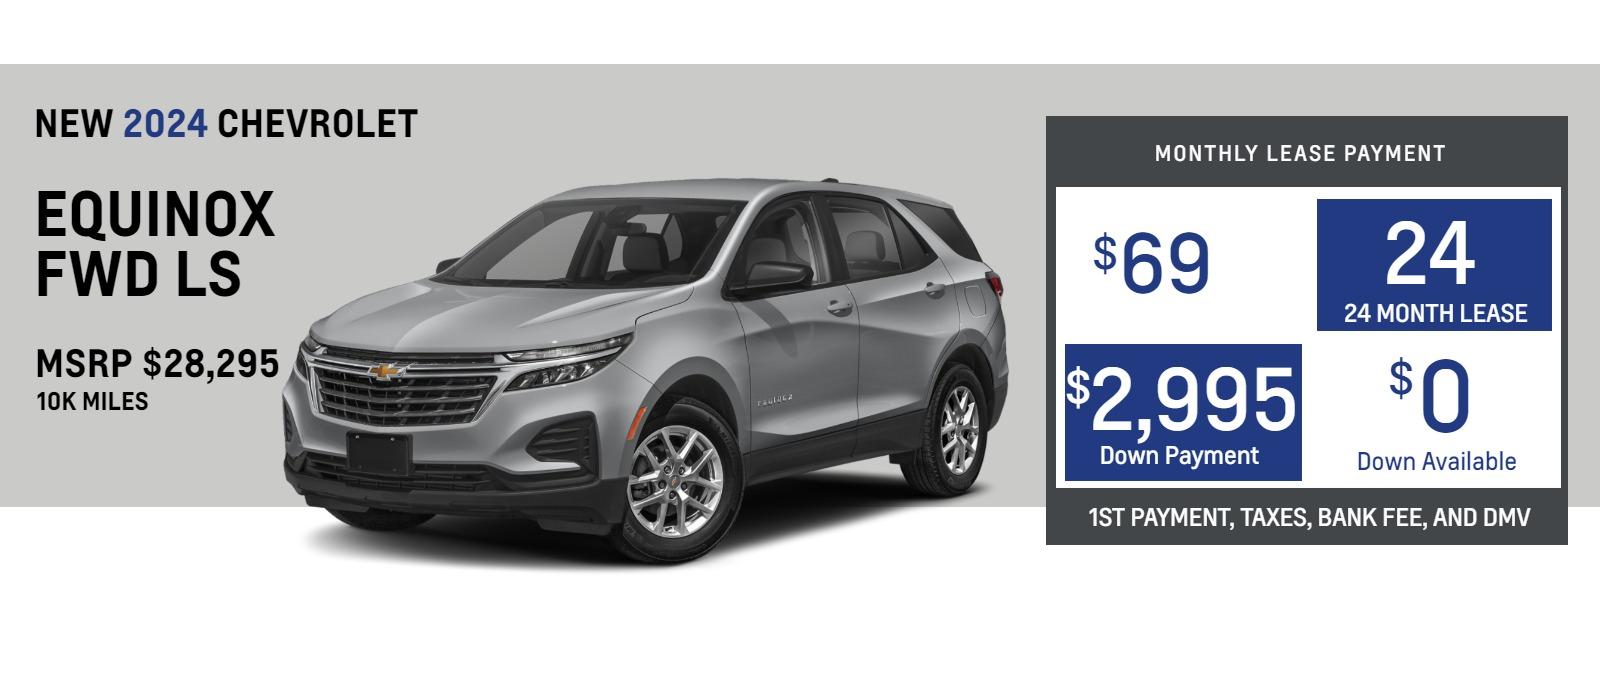 2024 Chevrolet Equinox FWD LS
MSRP $28,295.
$69. month
10k
24 months
$2,995. down plus taxes, bank fee and DMV 
*includes all incentives